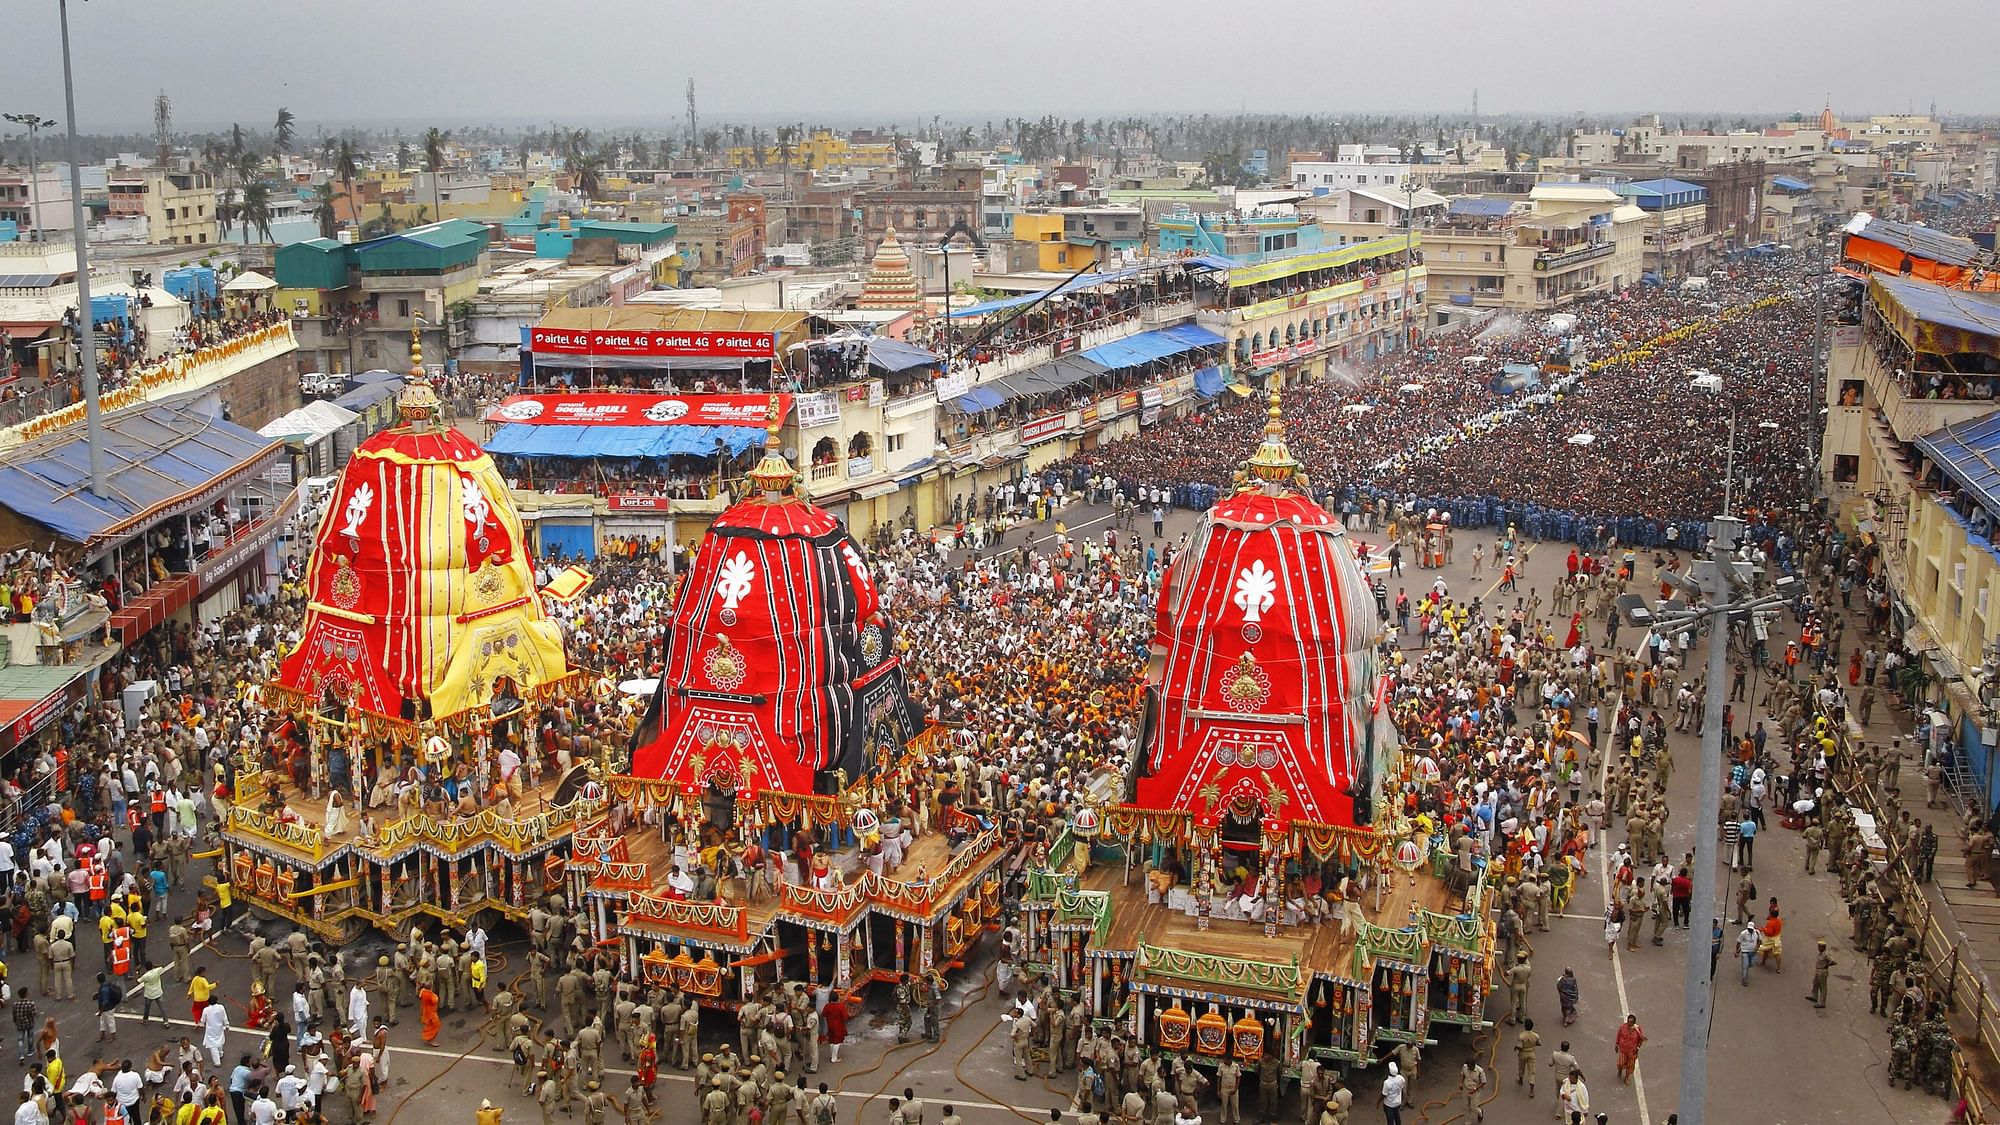 File photo of the Rath Yatra.